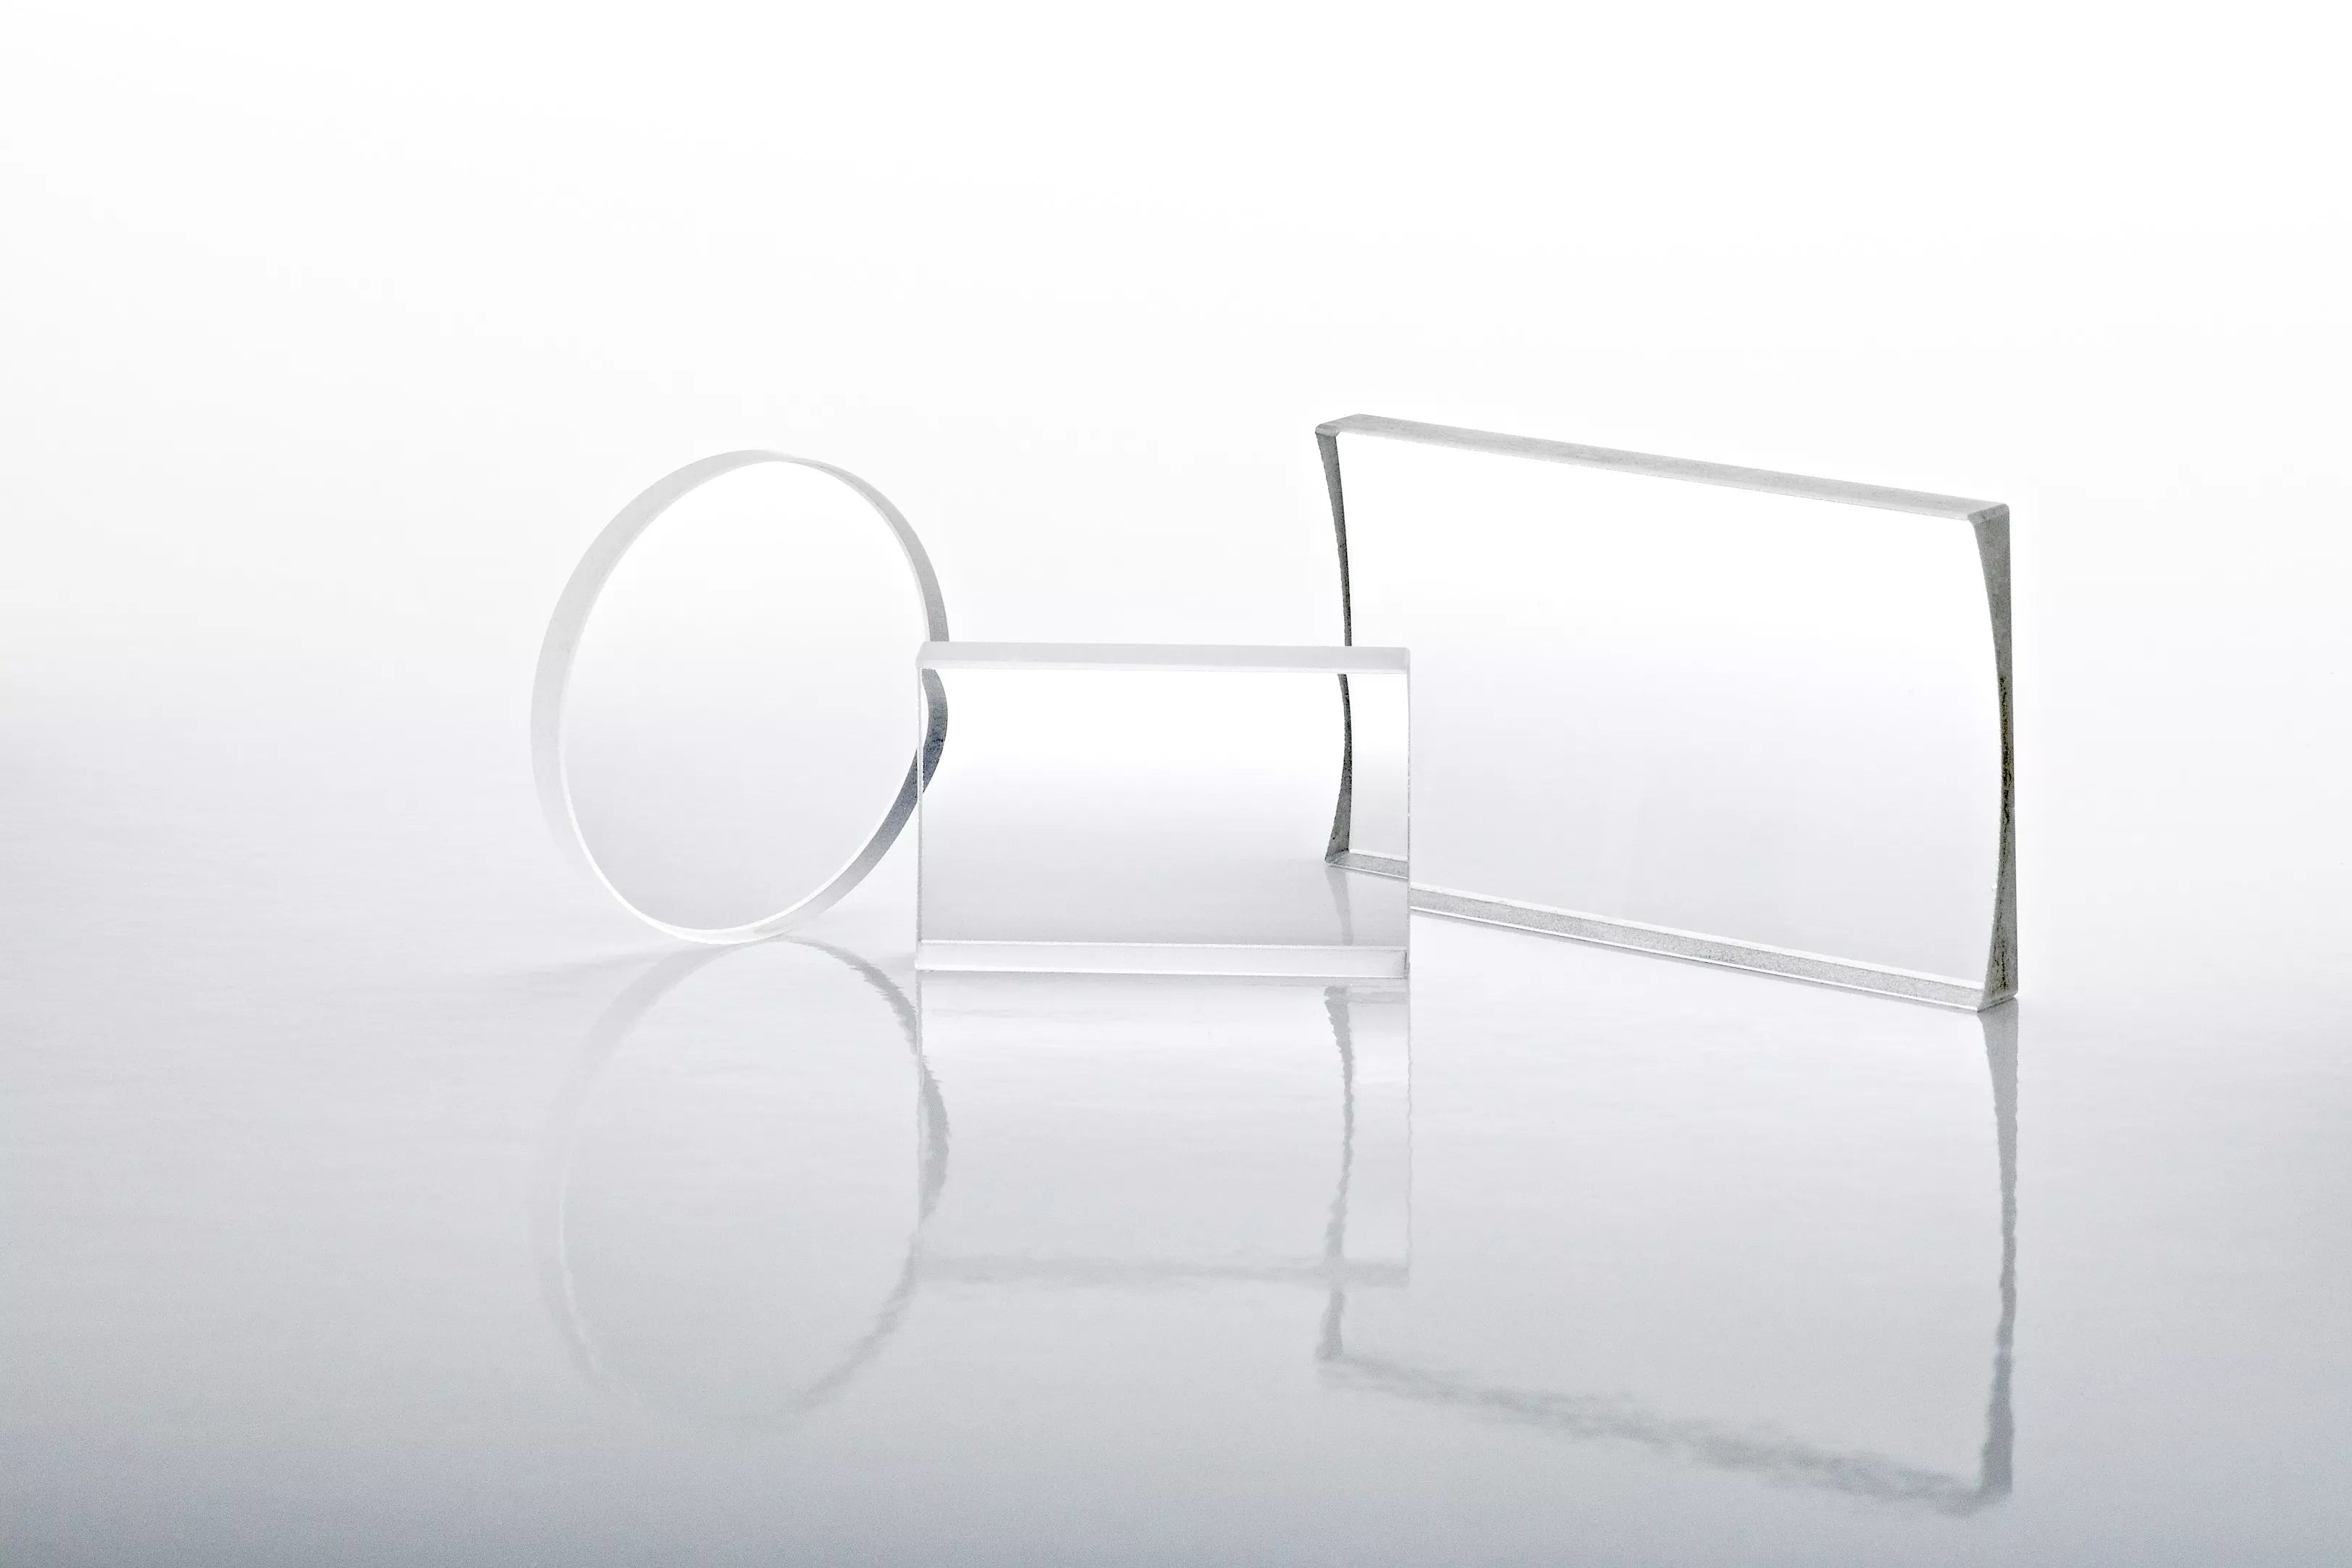 LCR2517-XS-Cylindrical lens, planoconvex, 25mmfl, 16x12mm, 4.3mmCT, uncoated, BK7 or equiv.